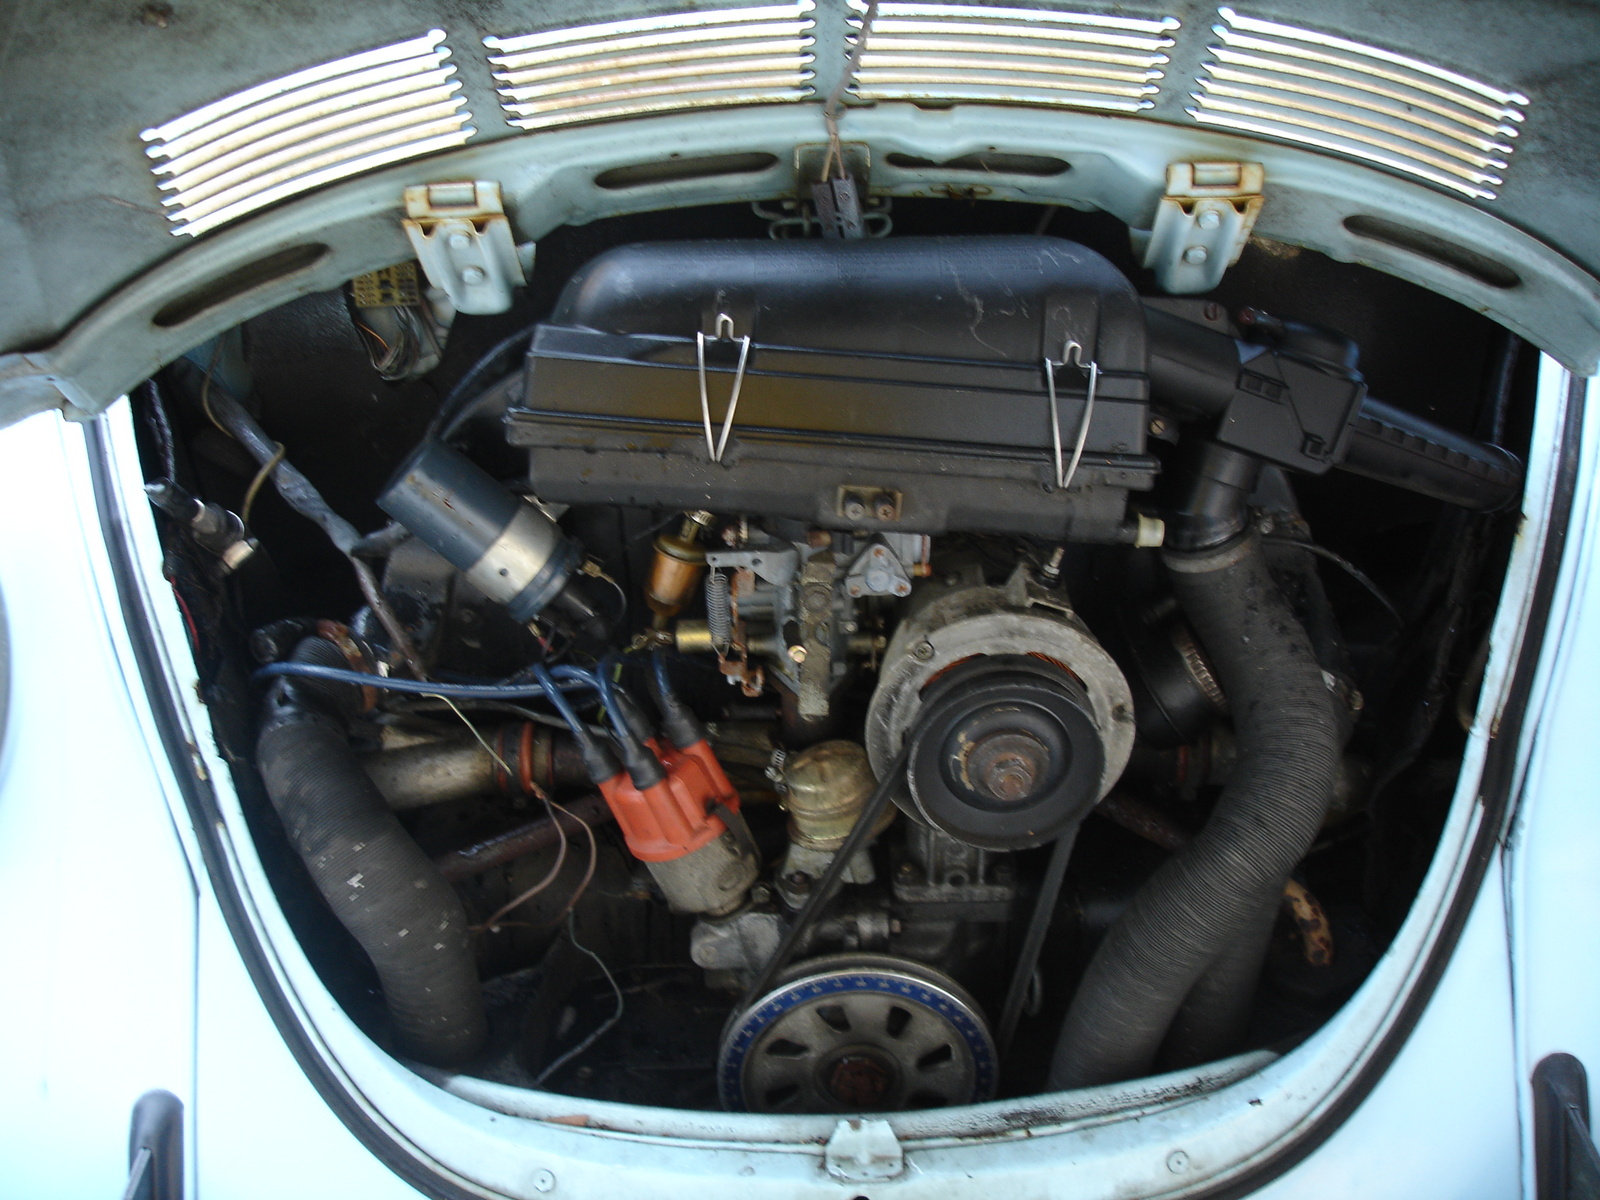 Service manual [Picture Of 1973 Volkswagen Beetle Engine ...